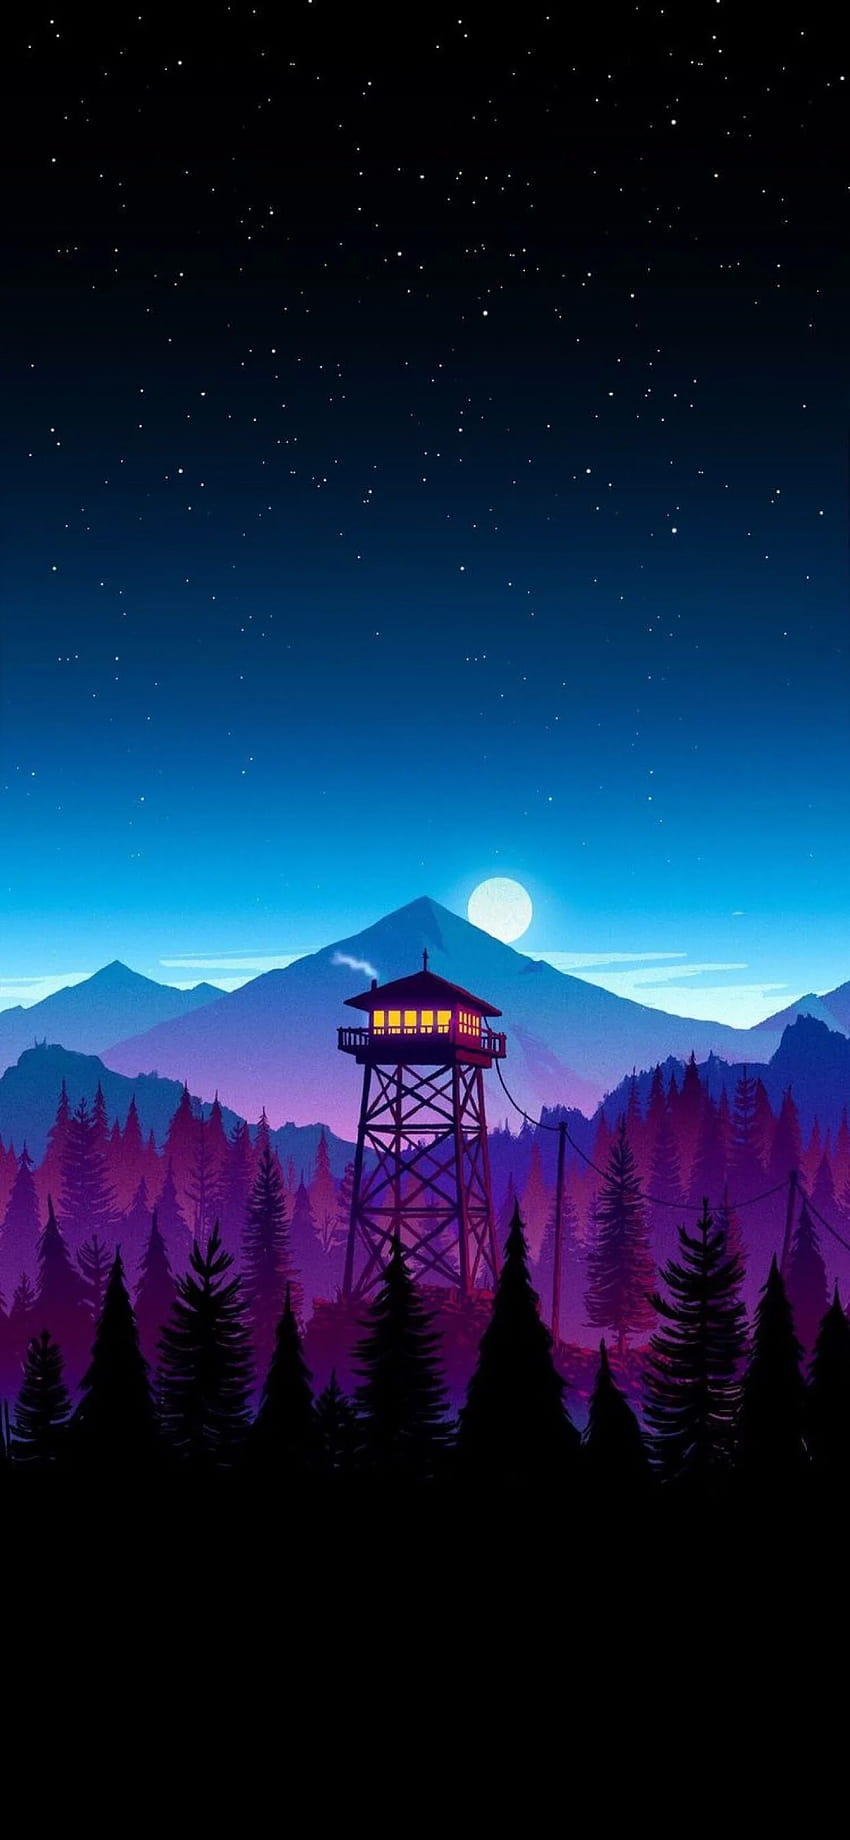 Low poly Watchtower Ambienti low poly nel 2019, watchtower iphone Sfondo del telefono HD